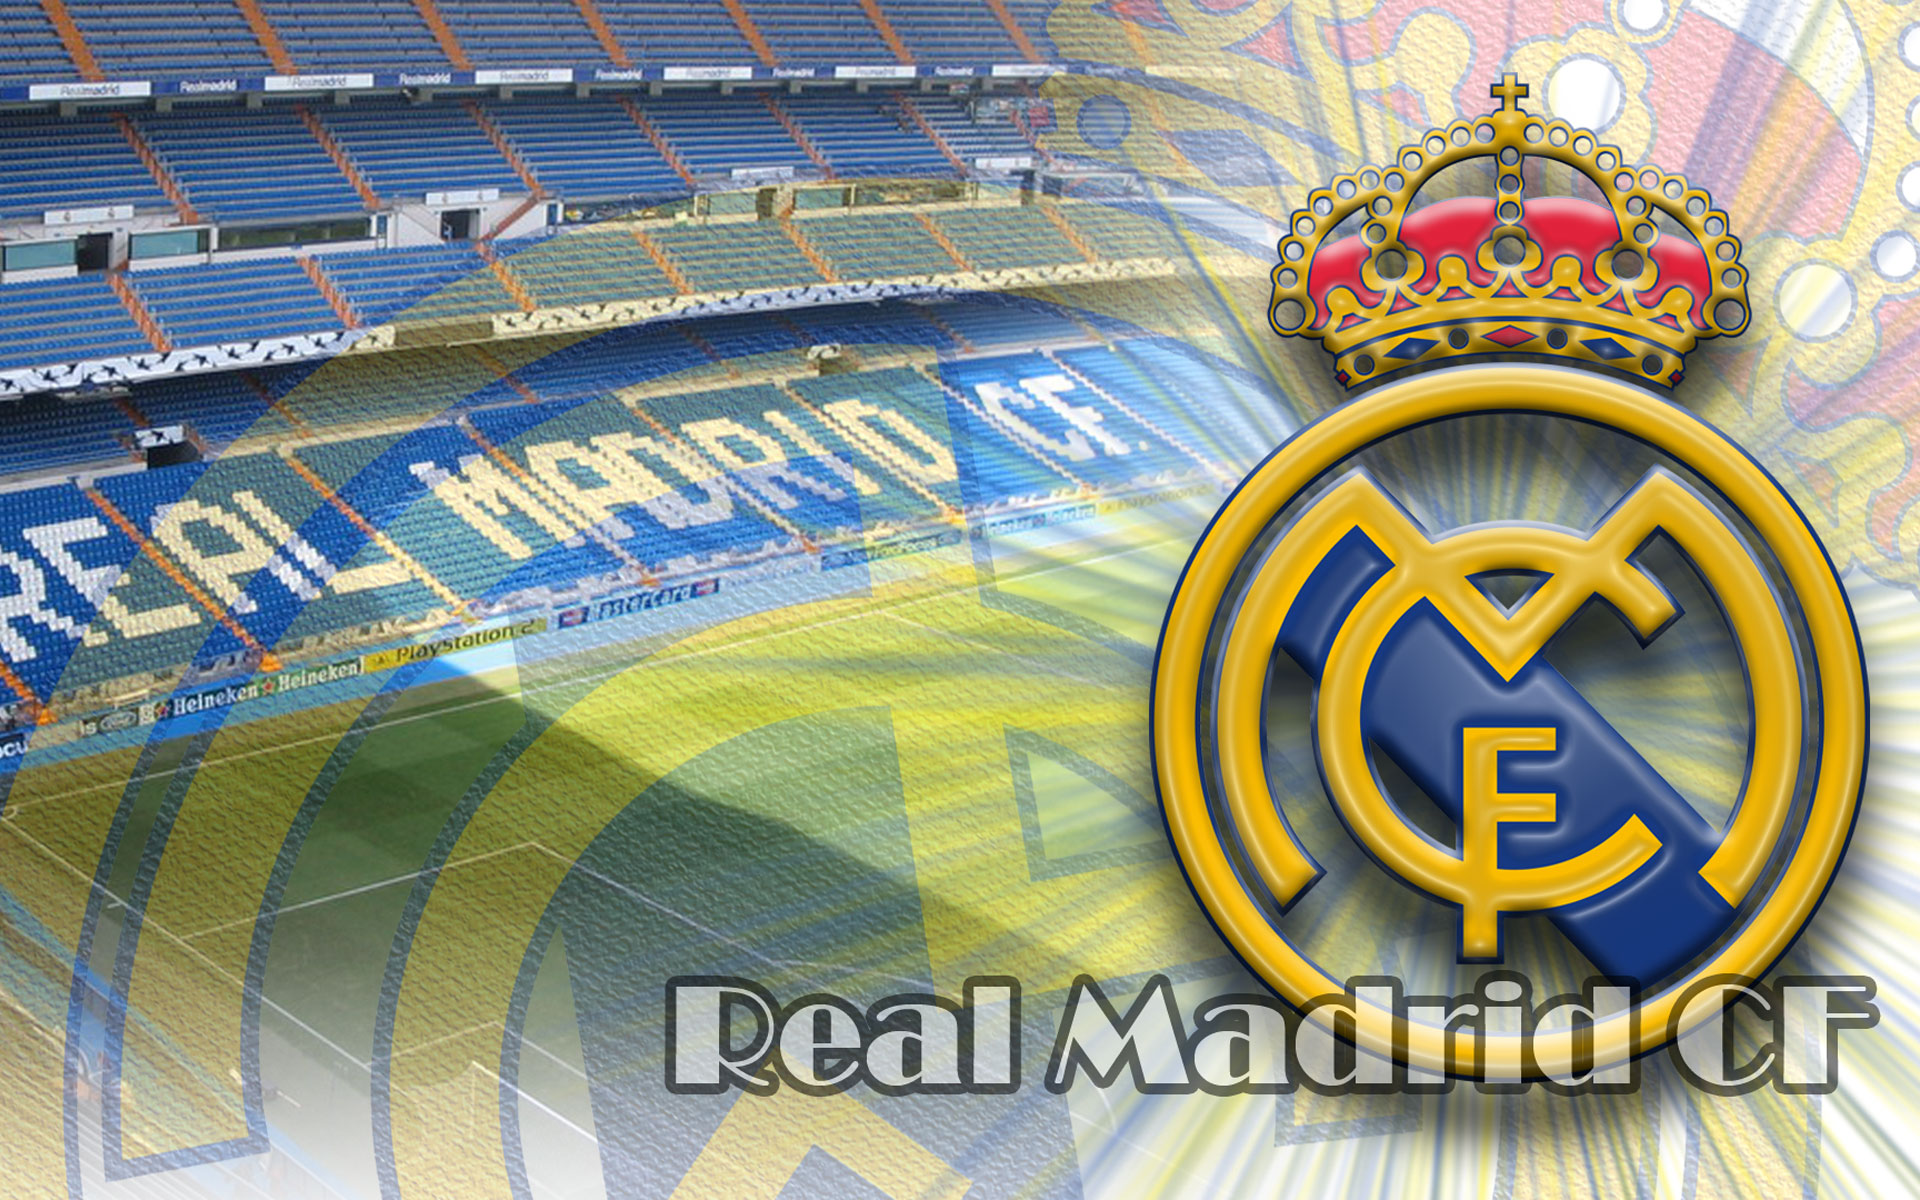 Wallpaper Real Madrid C F High Quality Background